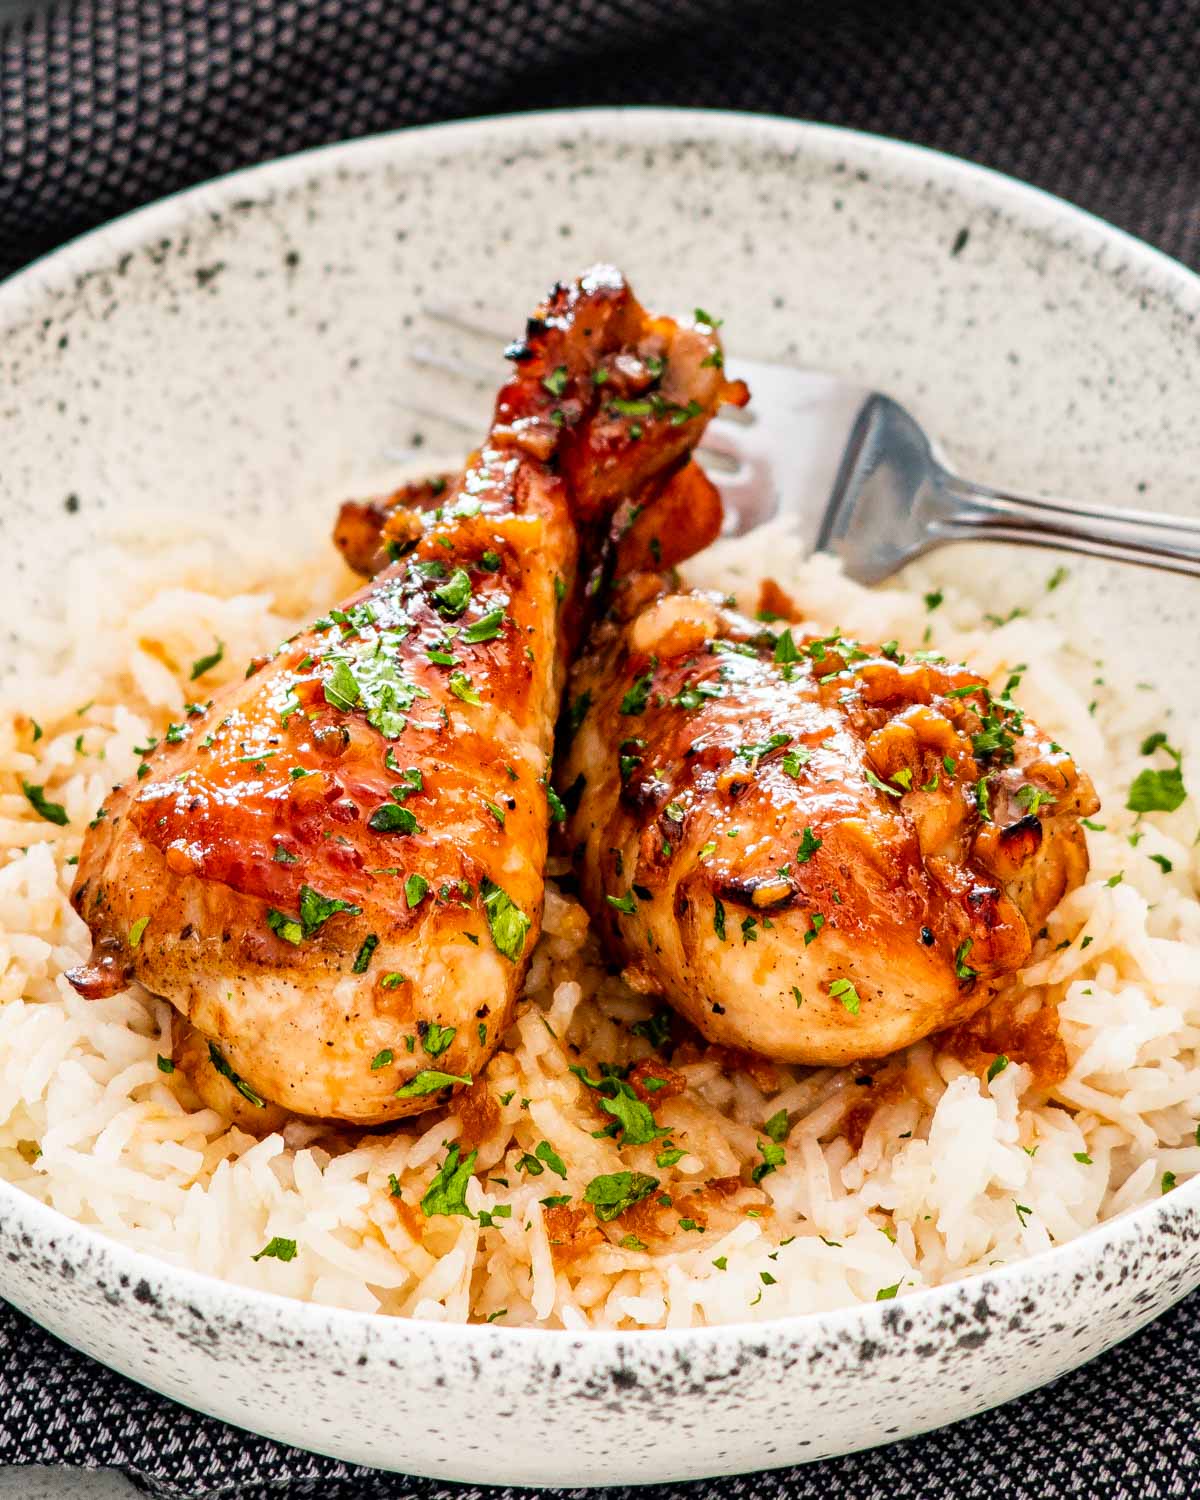 two honey soy chicken drumsticks over a bed of rice garnished with parsley.